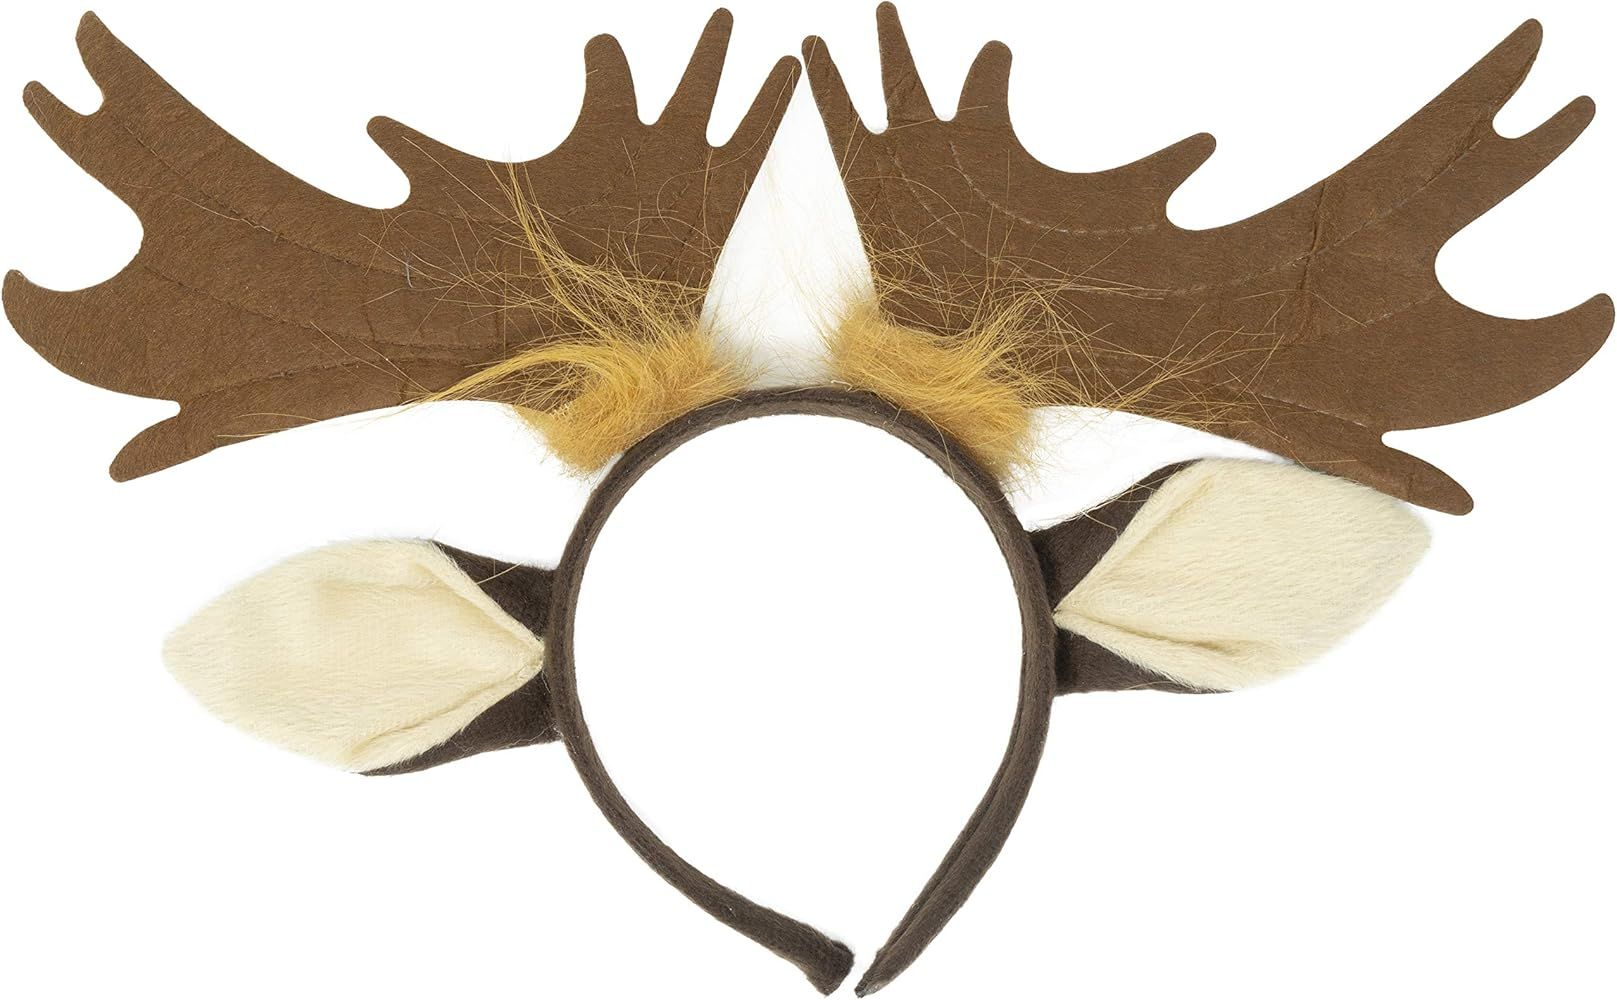 Moose Antlers Headband Accessory Set - Fits Adults and Kids | Amazon (US)